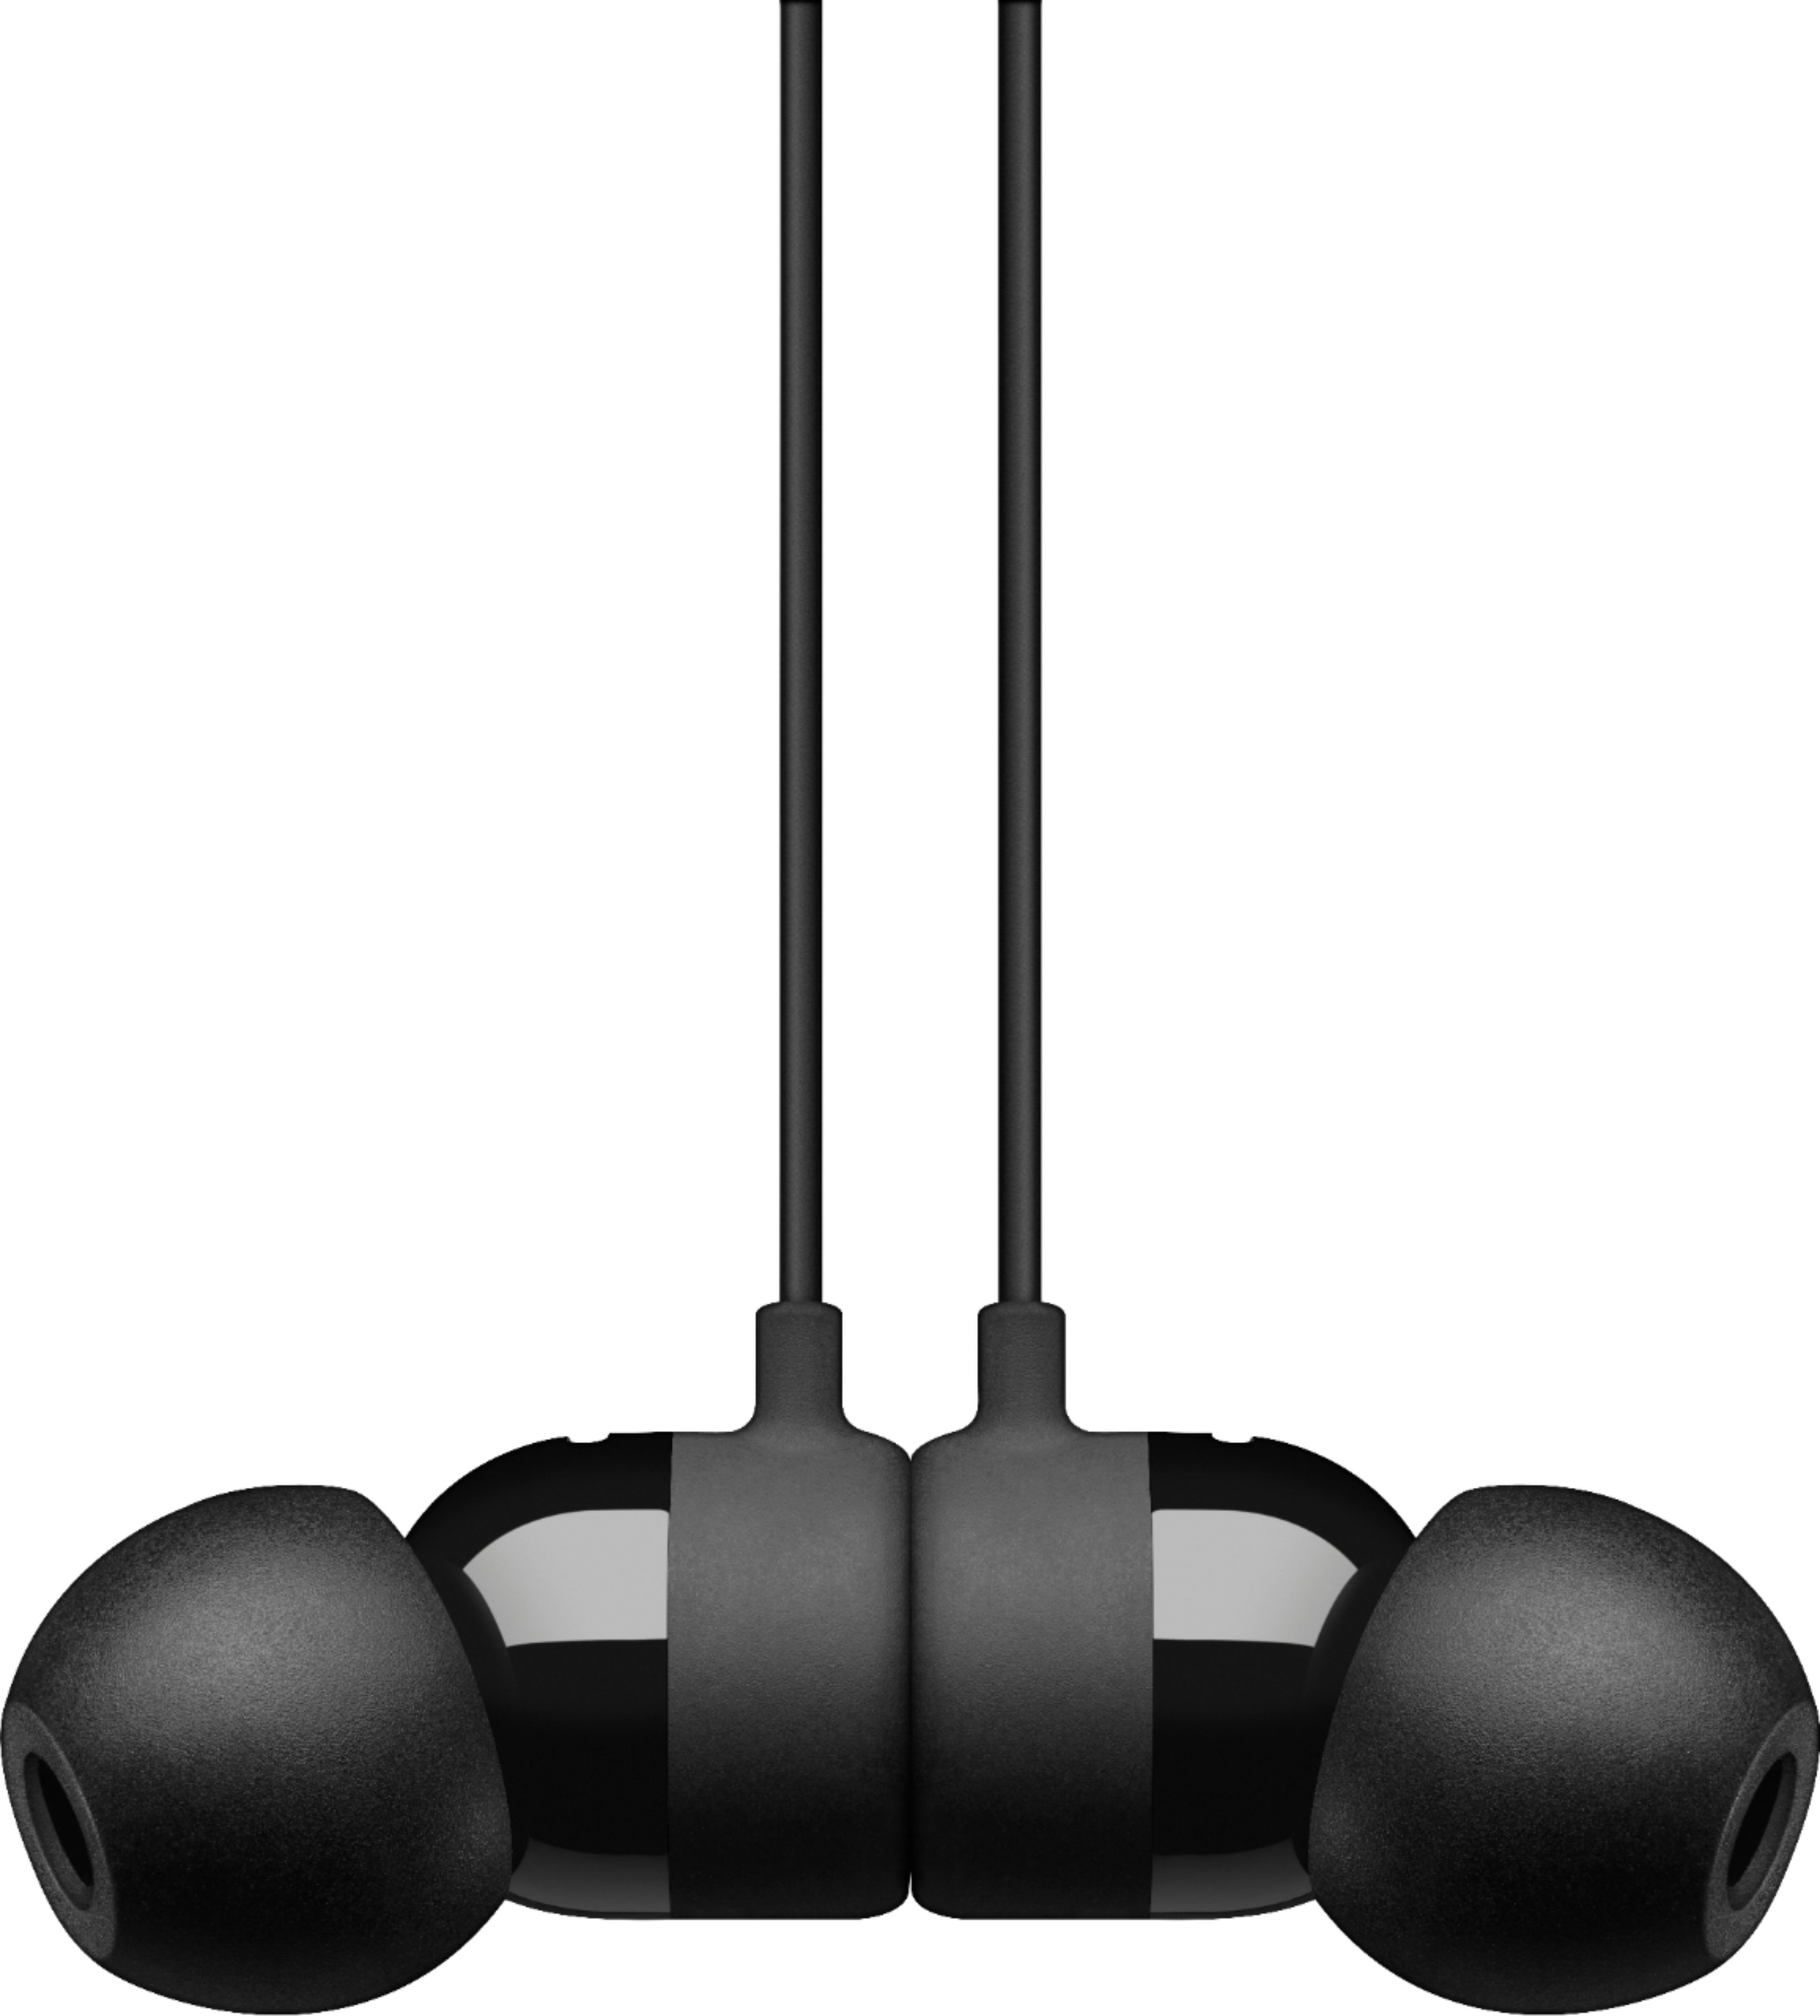 Best Buy: Beats by urBeats³ Earphones with Lightning Connector Black MU992LL/A